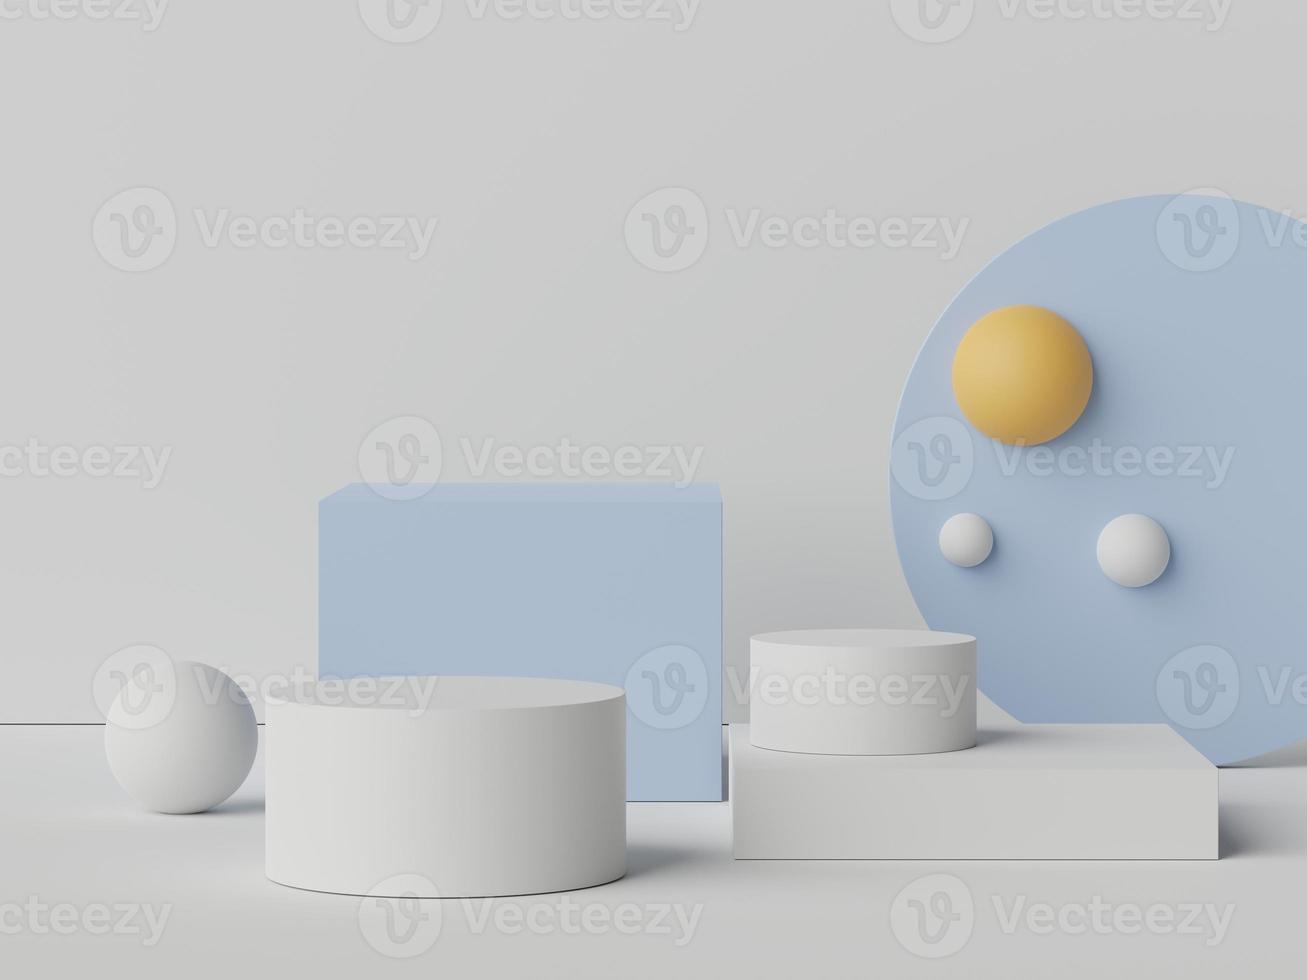 3d rendering of pastel minimal scene of white blank podium with earth tones theme. Muted saturated color. Simple geometric shapes design. photo